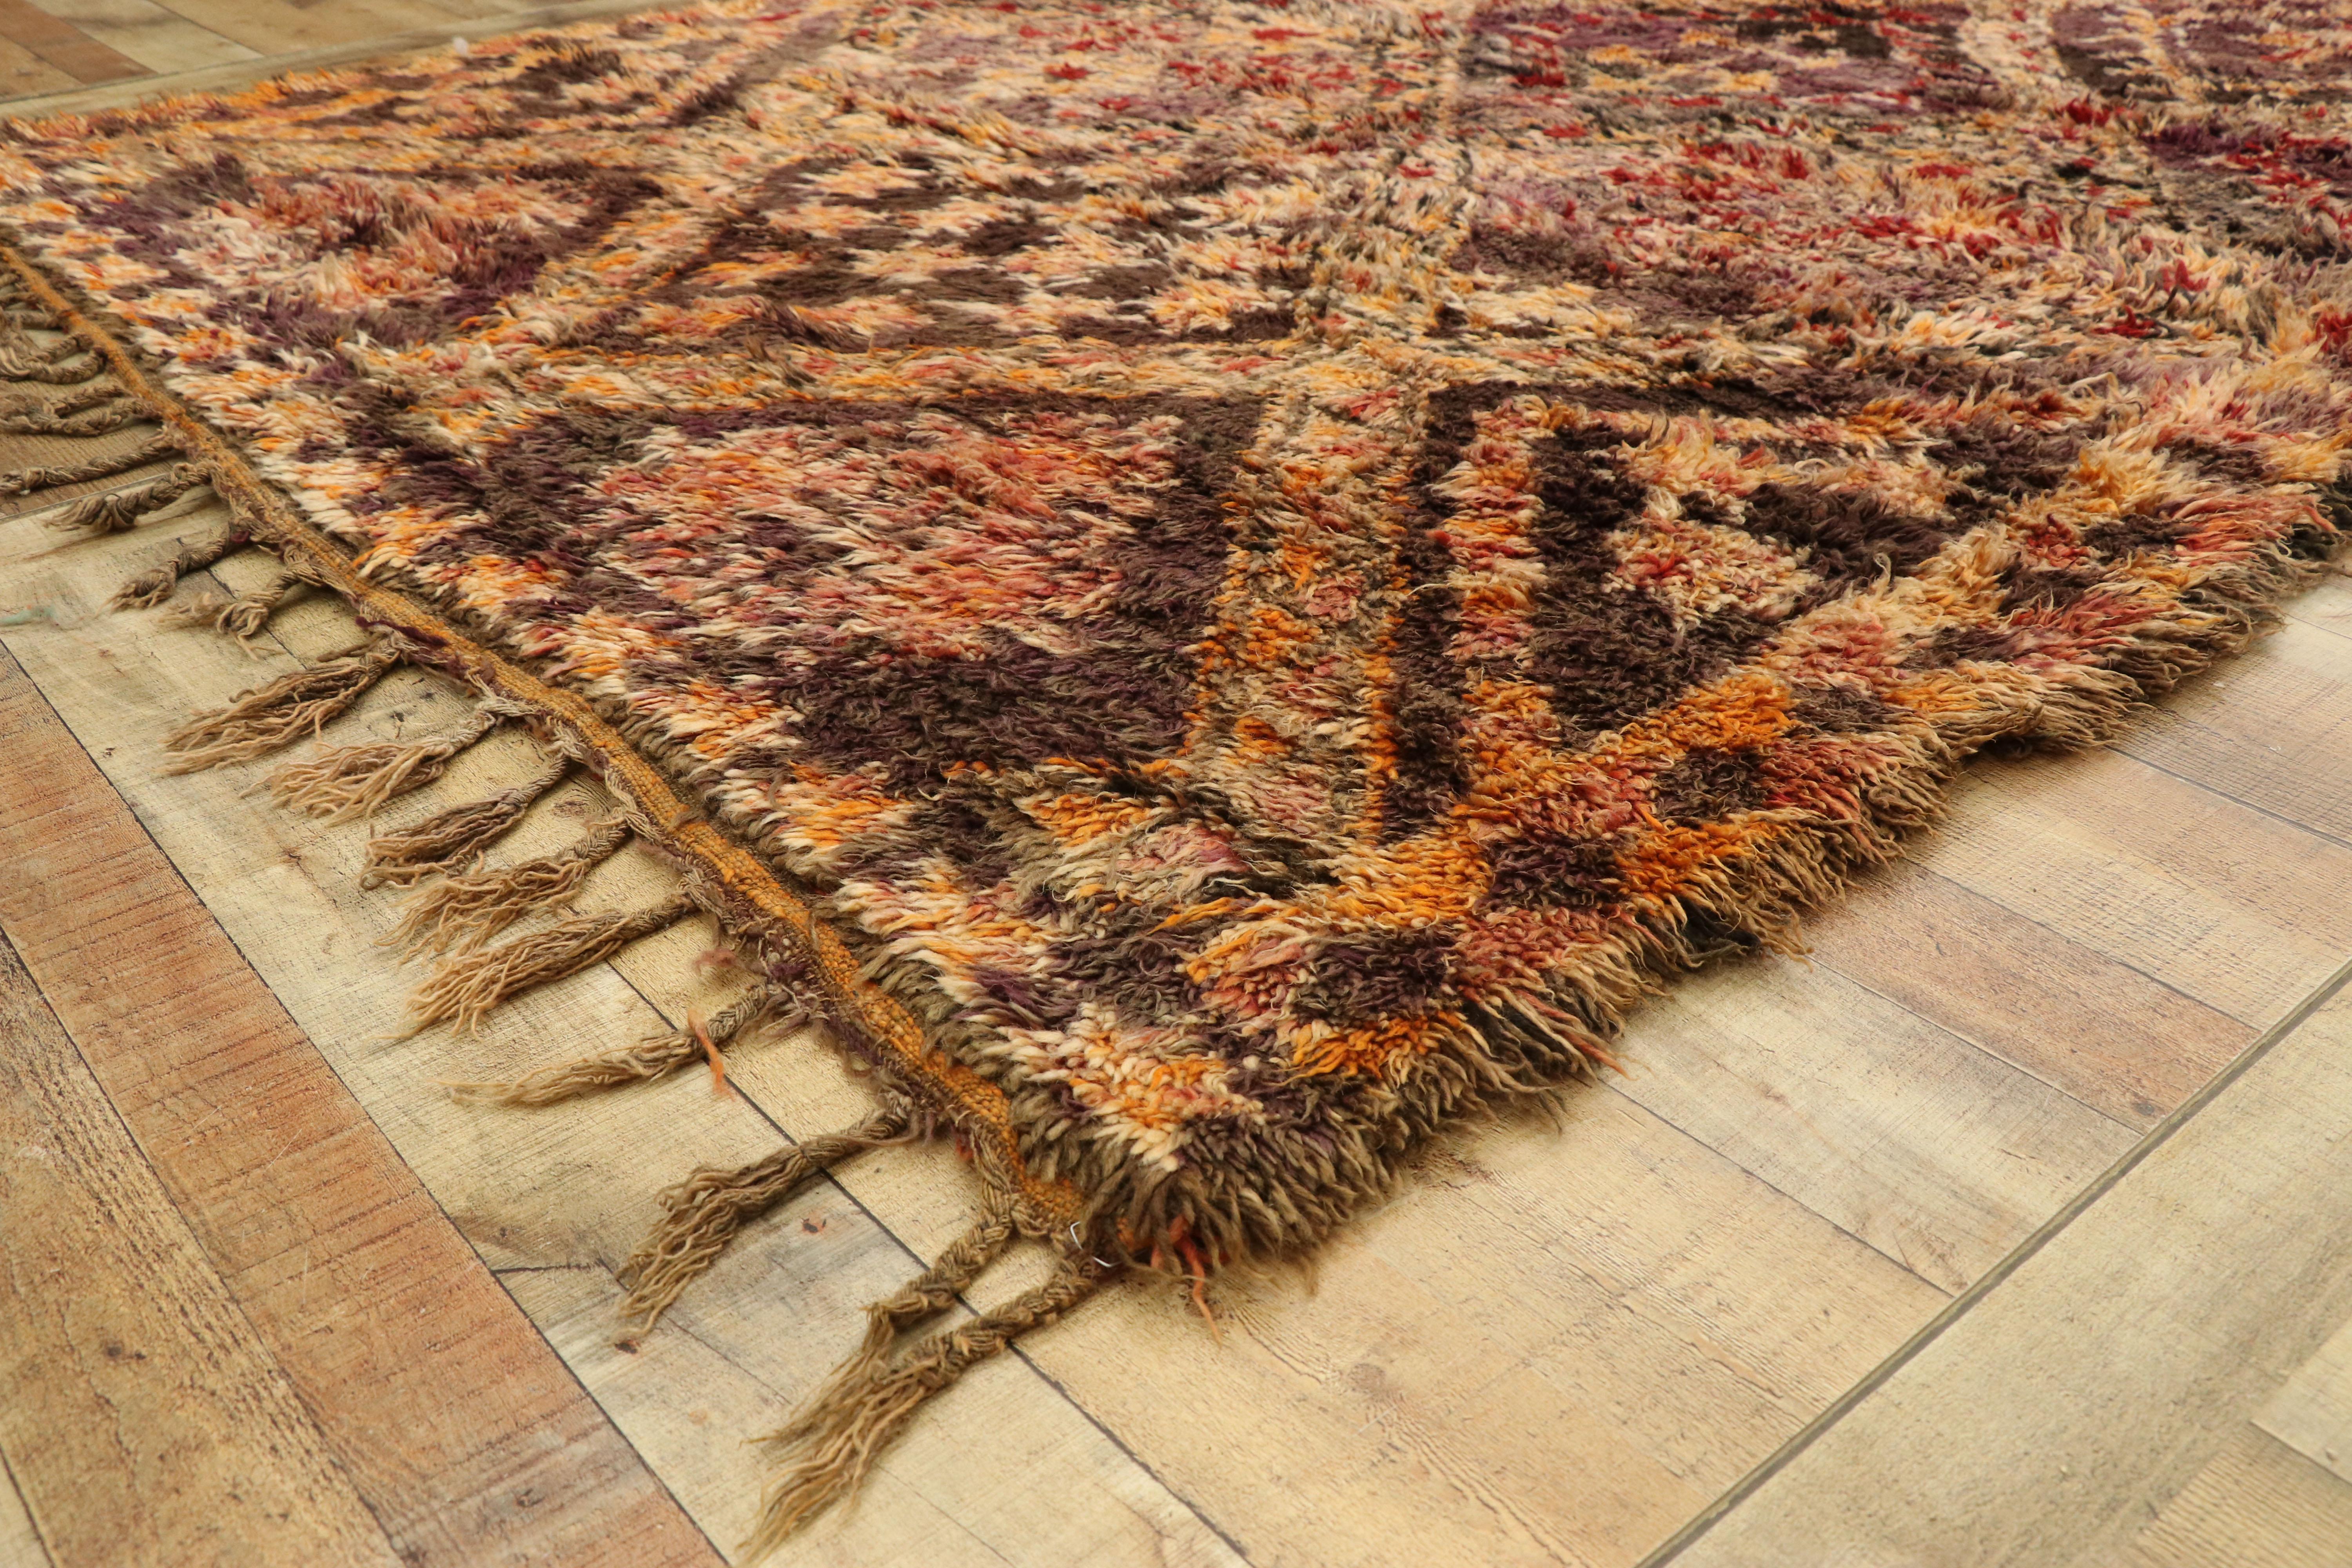 20th Century Vintage Berber Moroccan Rug, Brown Zayane Carpet with Mid-Century Modern Style